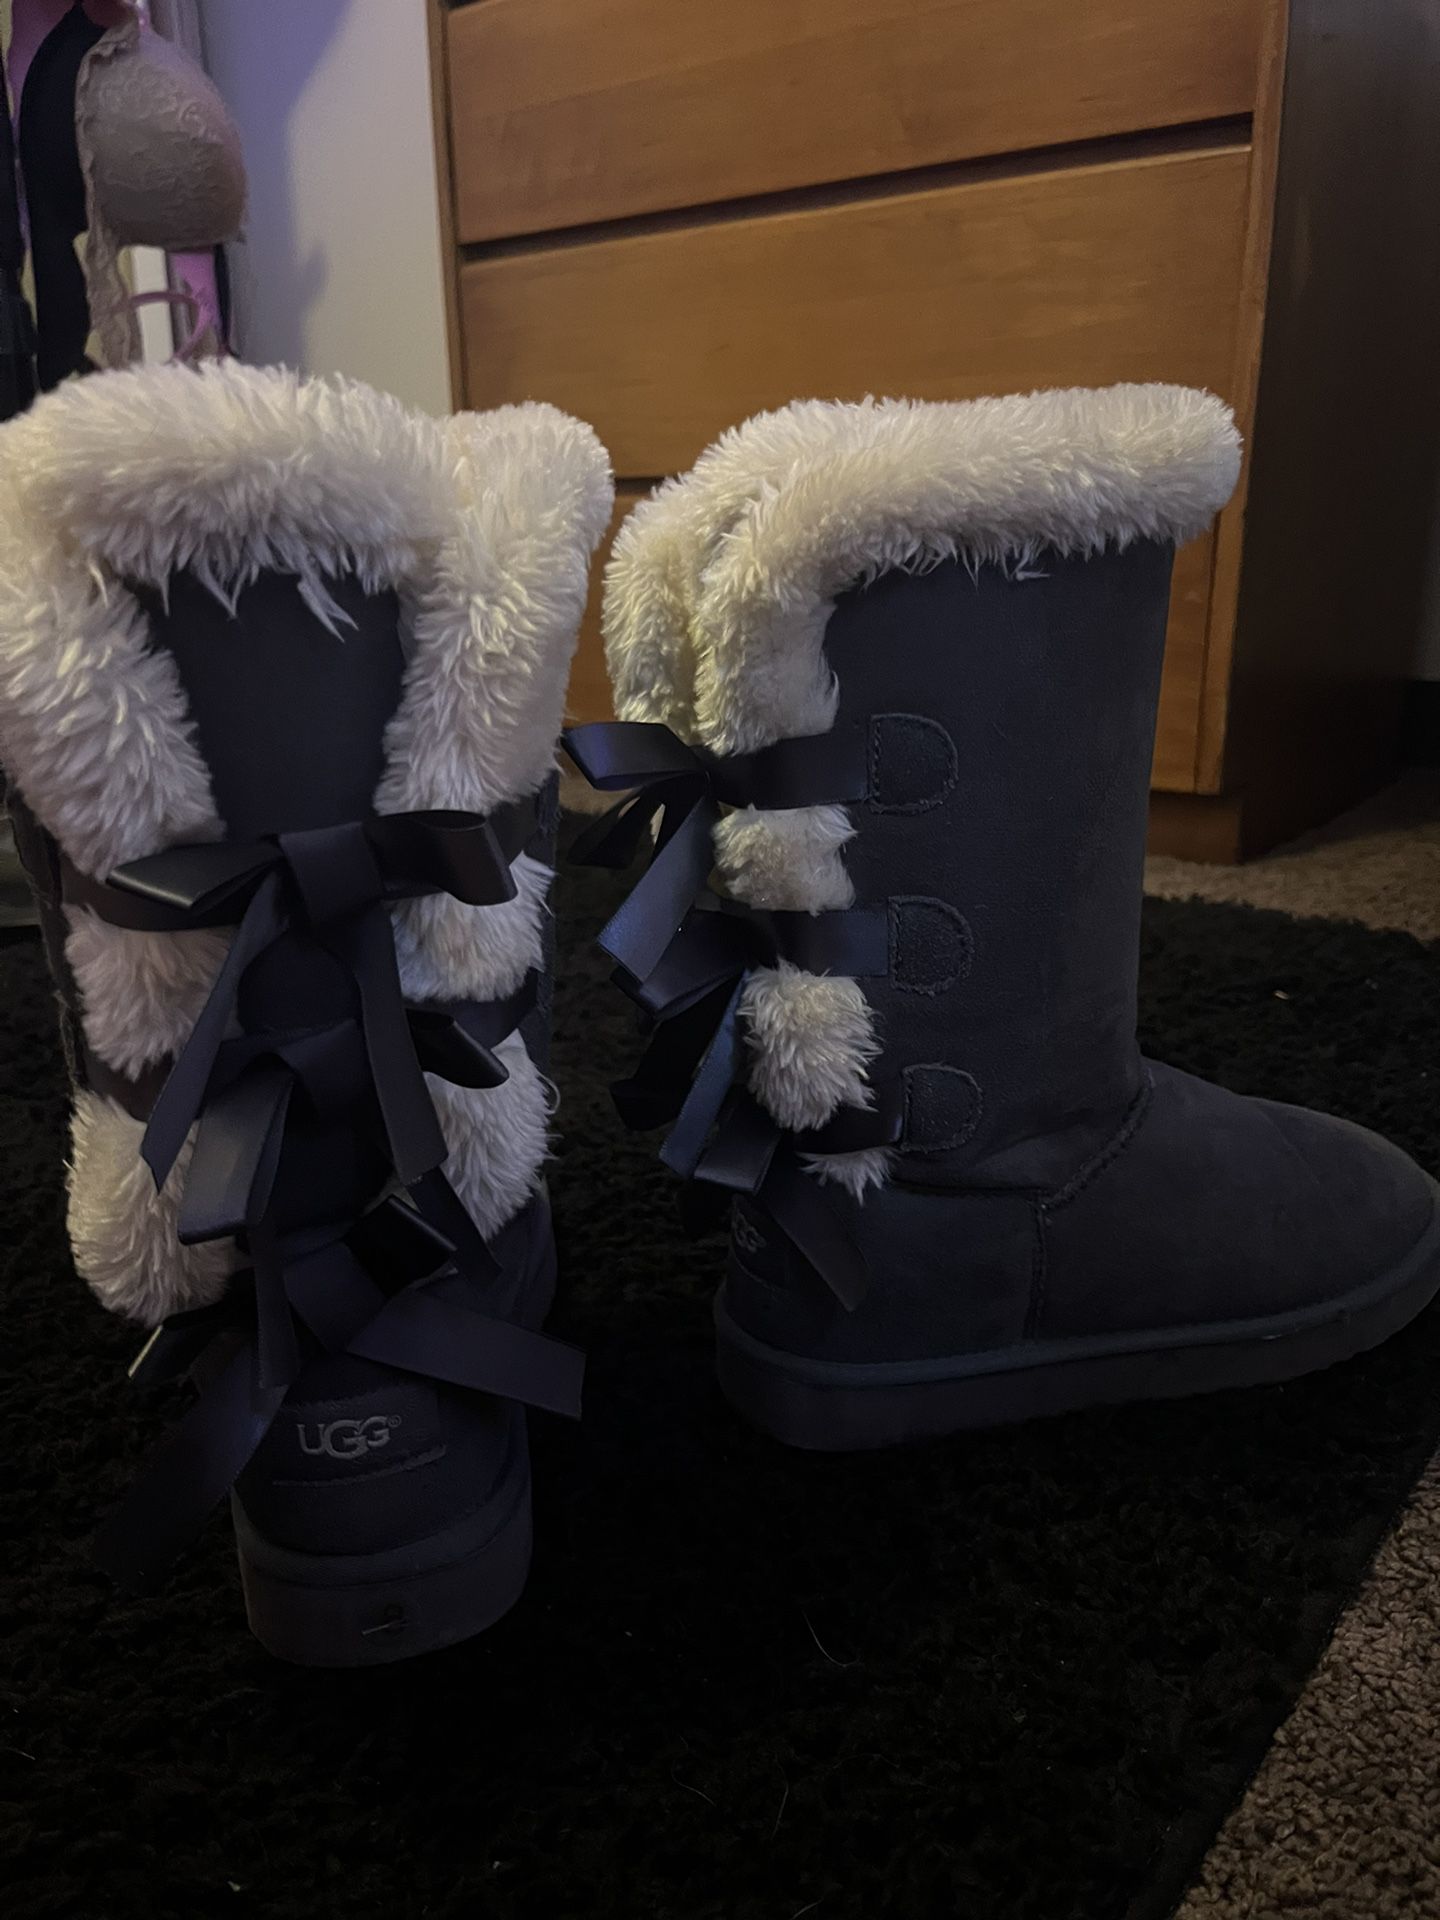 UGG bailey Bow Boots